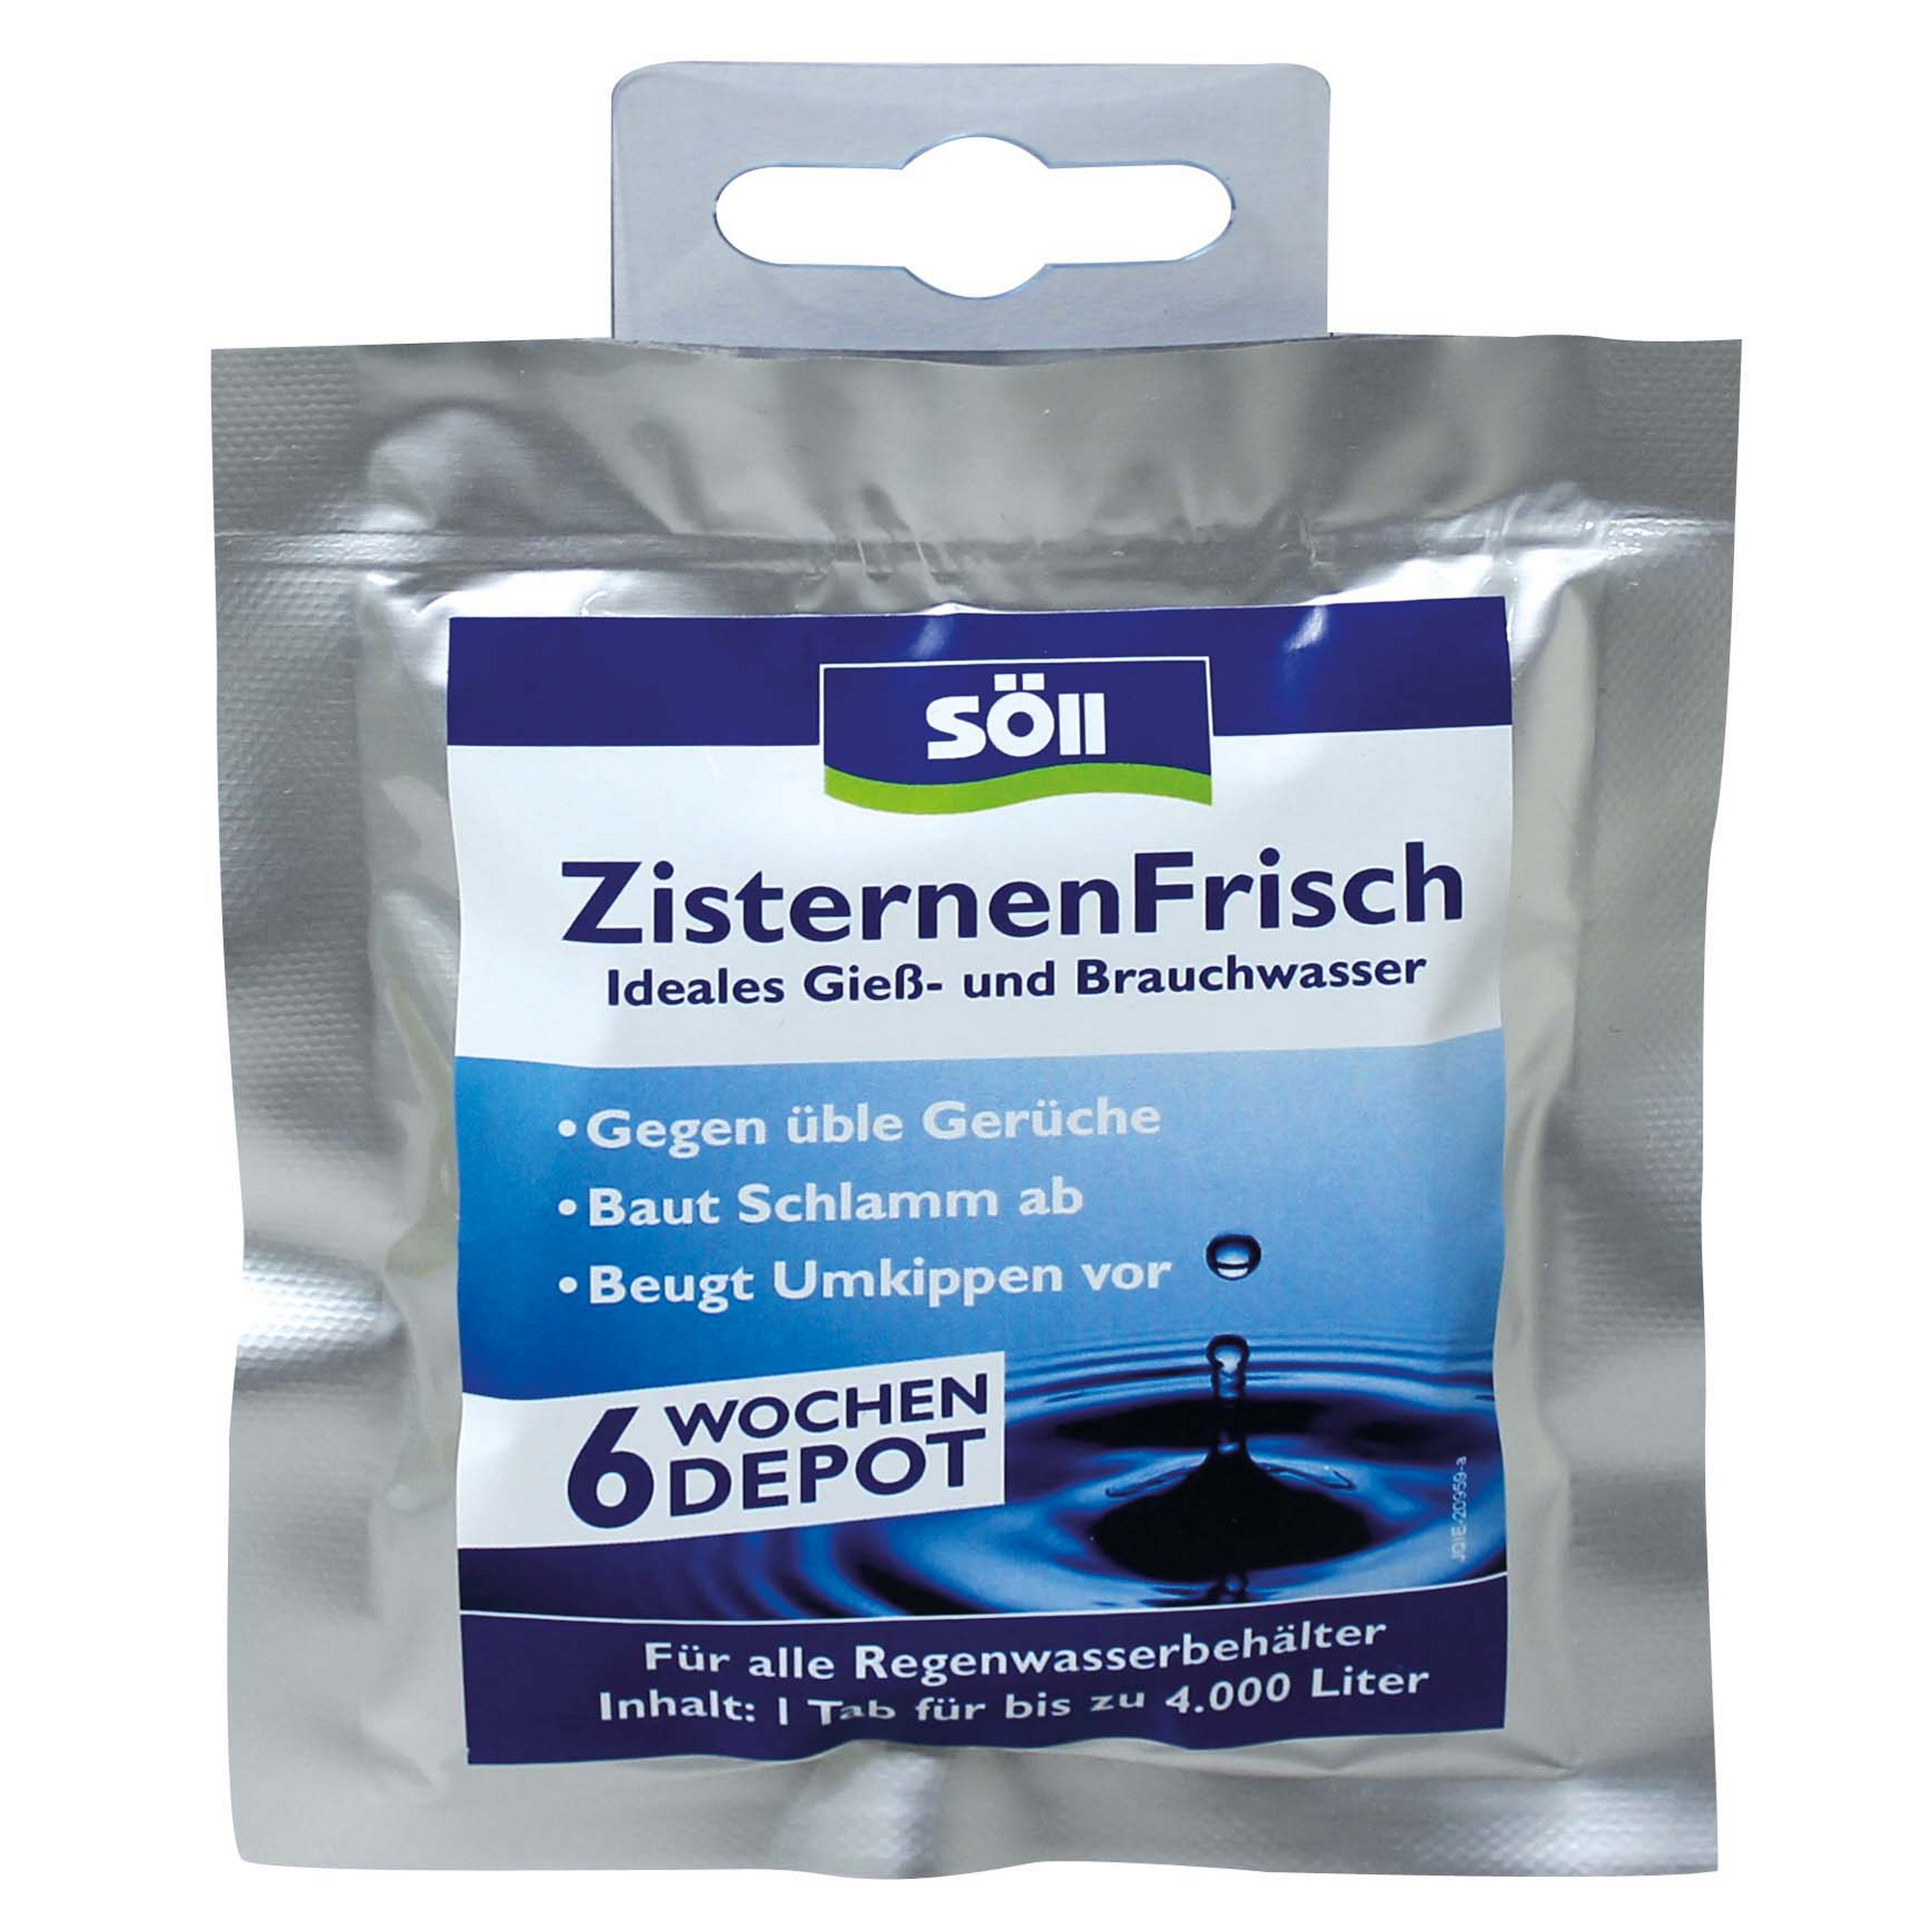 Zisternen-Frisch 1 Tab + product picture